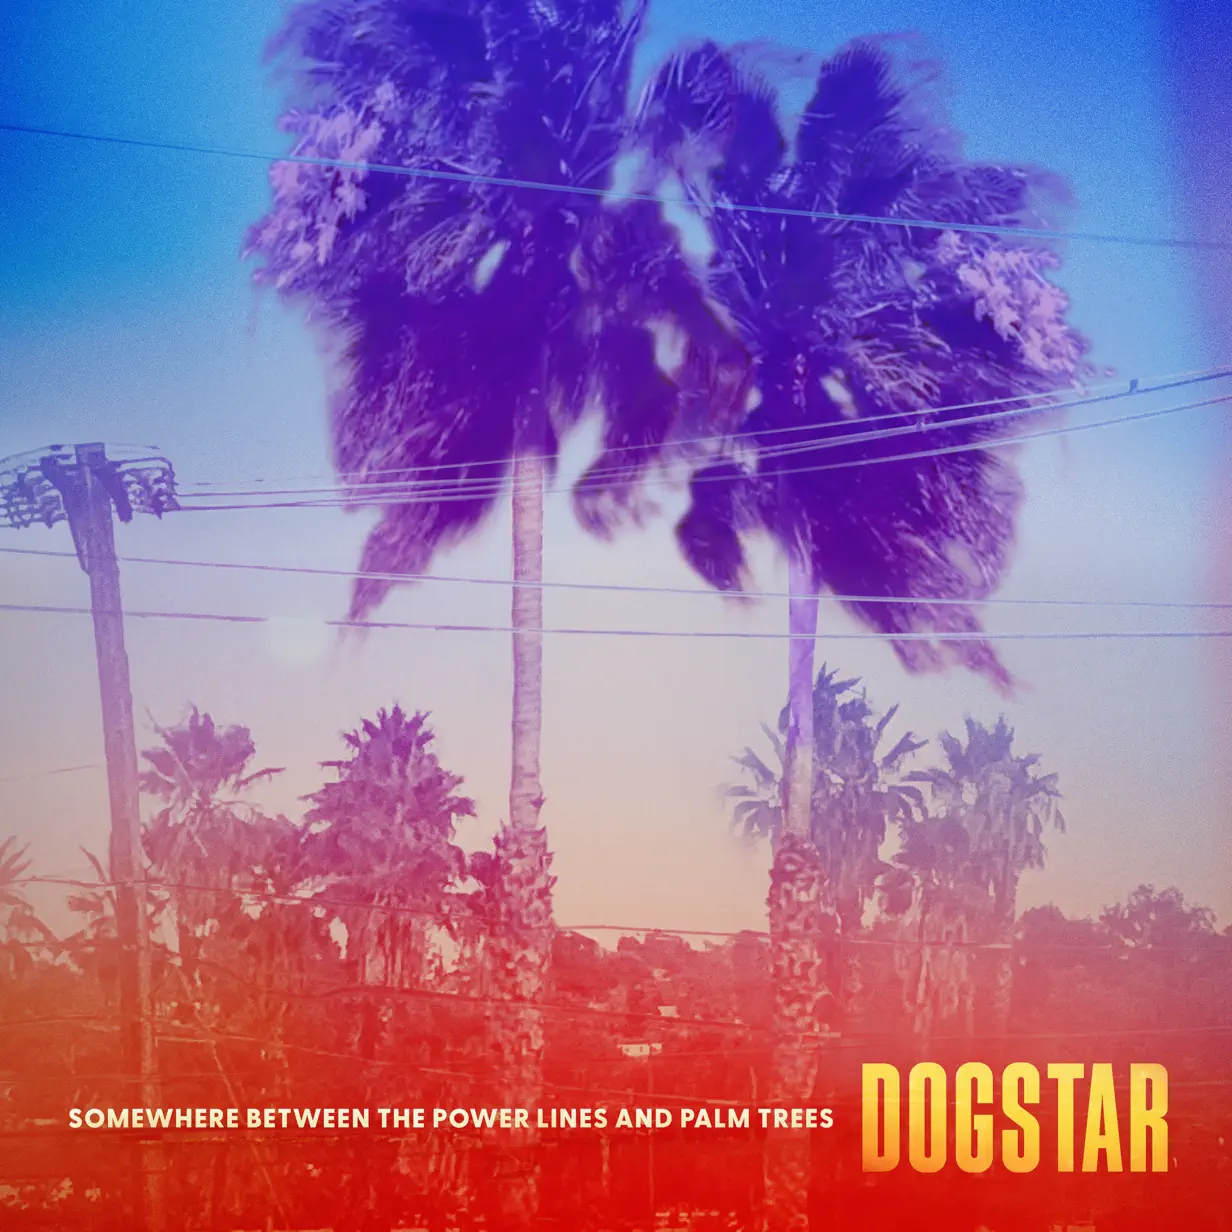 Dogstar‘s “Somewhere Between the Power Lines and Palm Trees” Album Download Leak MP3 ZIP Files